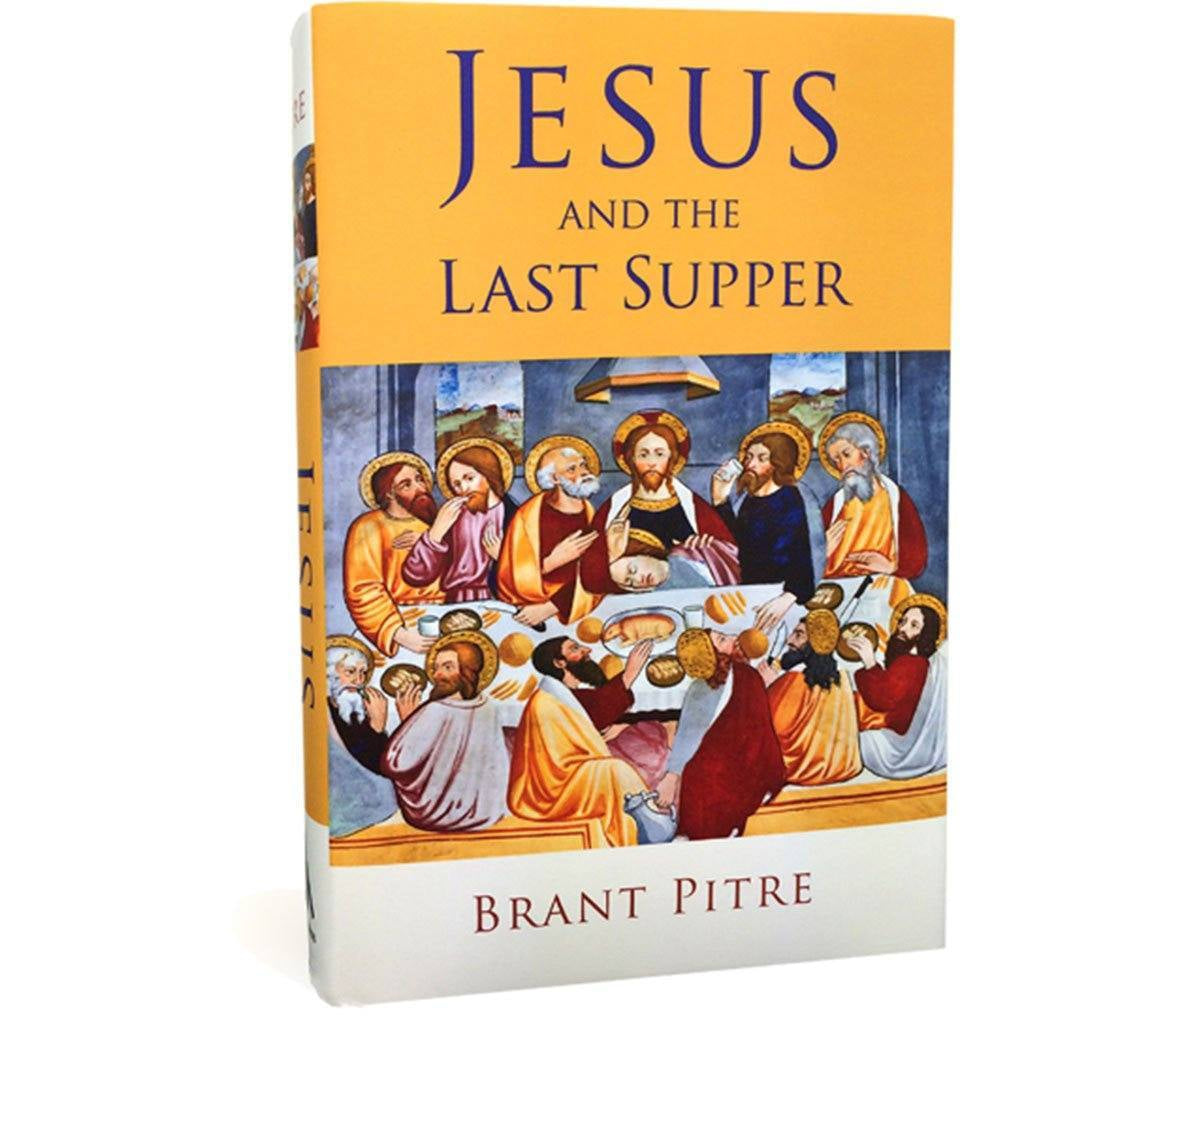 Dr.　Last　Jesus　Pitre　and　Supper　the　by　Brant　(Book)